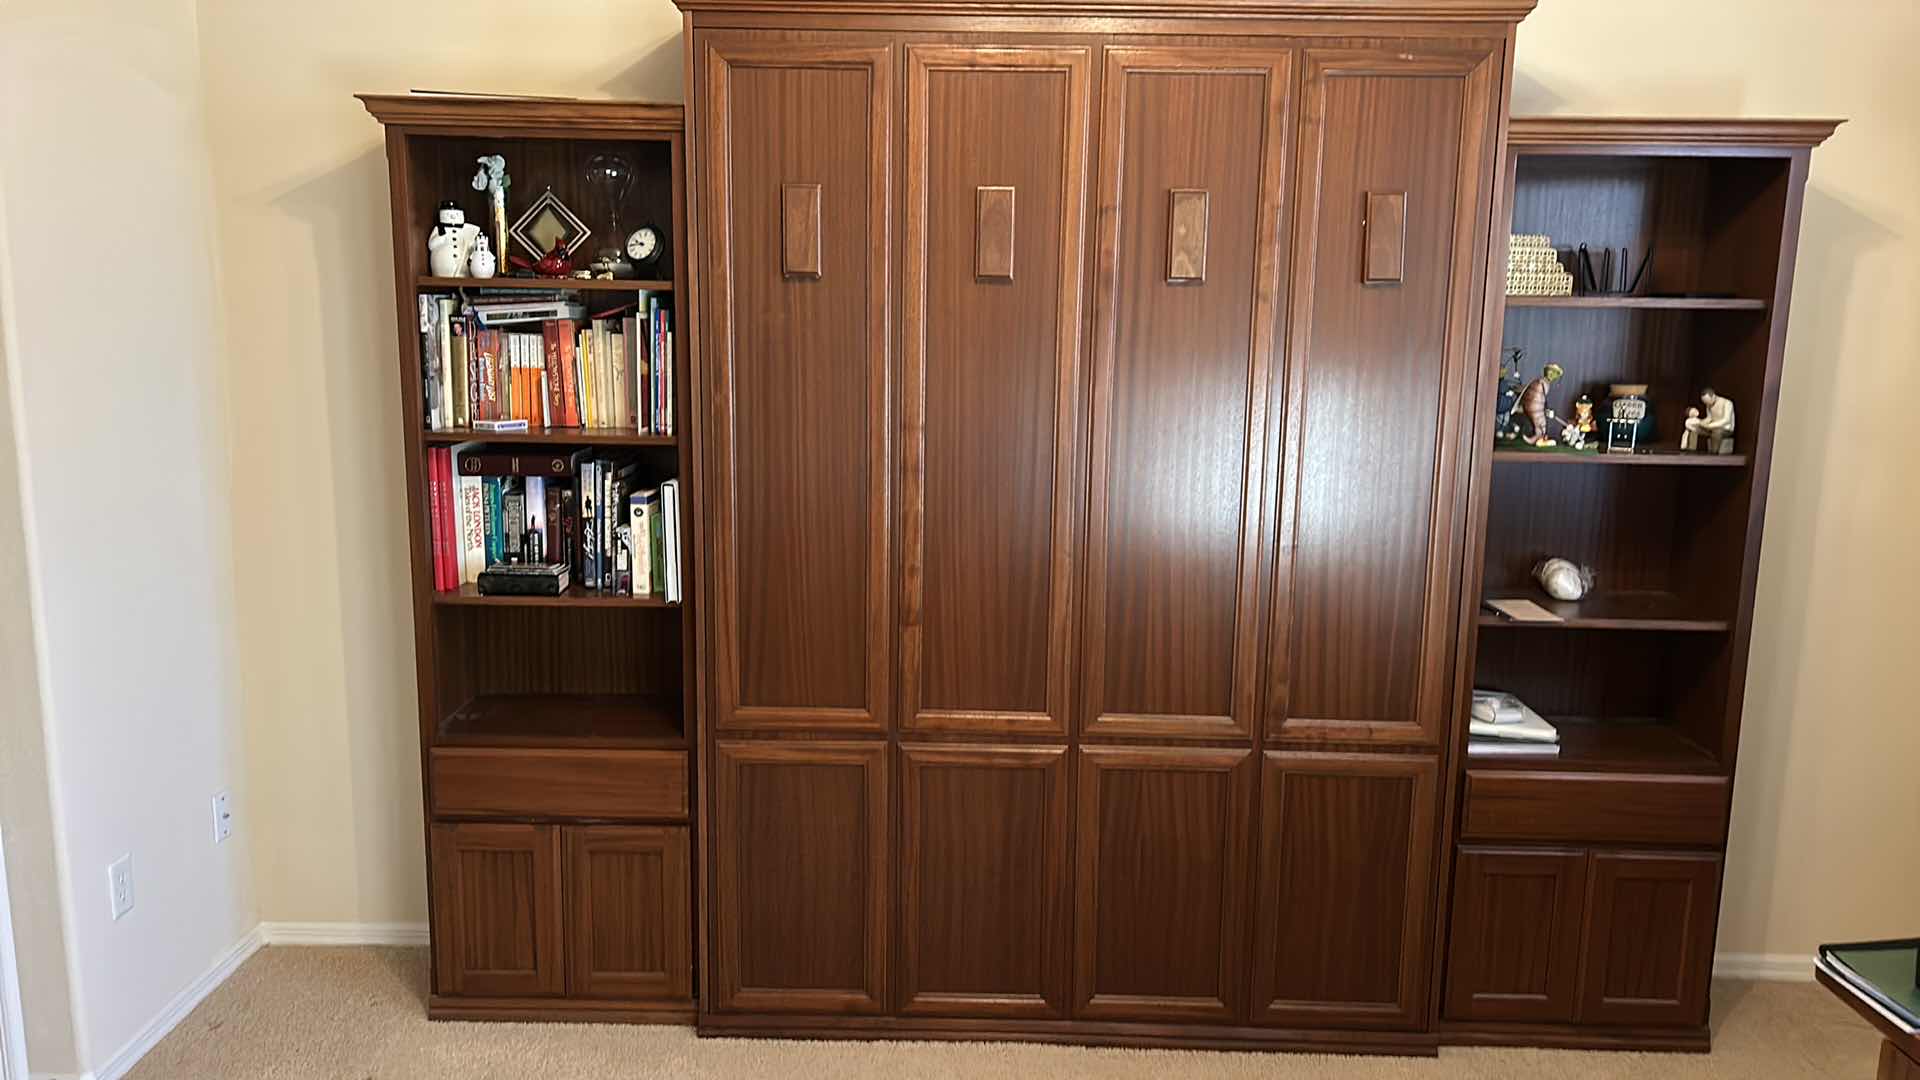 Photo 4 of WOOD MURPHY BED WITH CABINETS mattress is 62” x 81” ENTIRE UNIT 111” x 17” x 87”